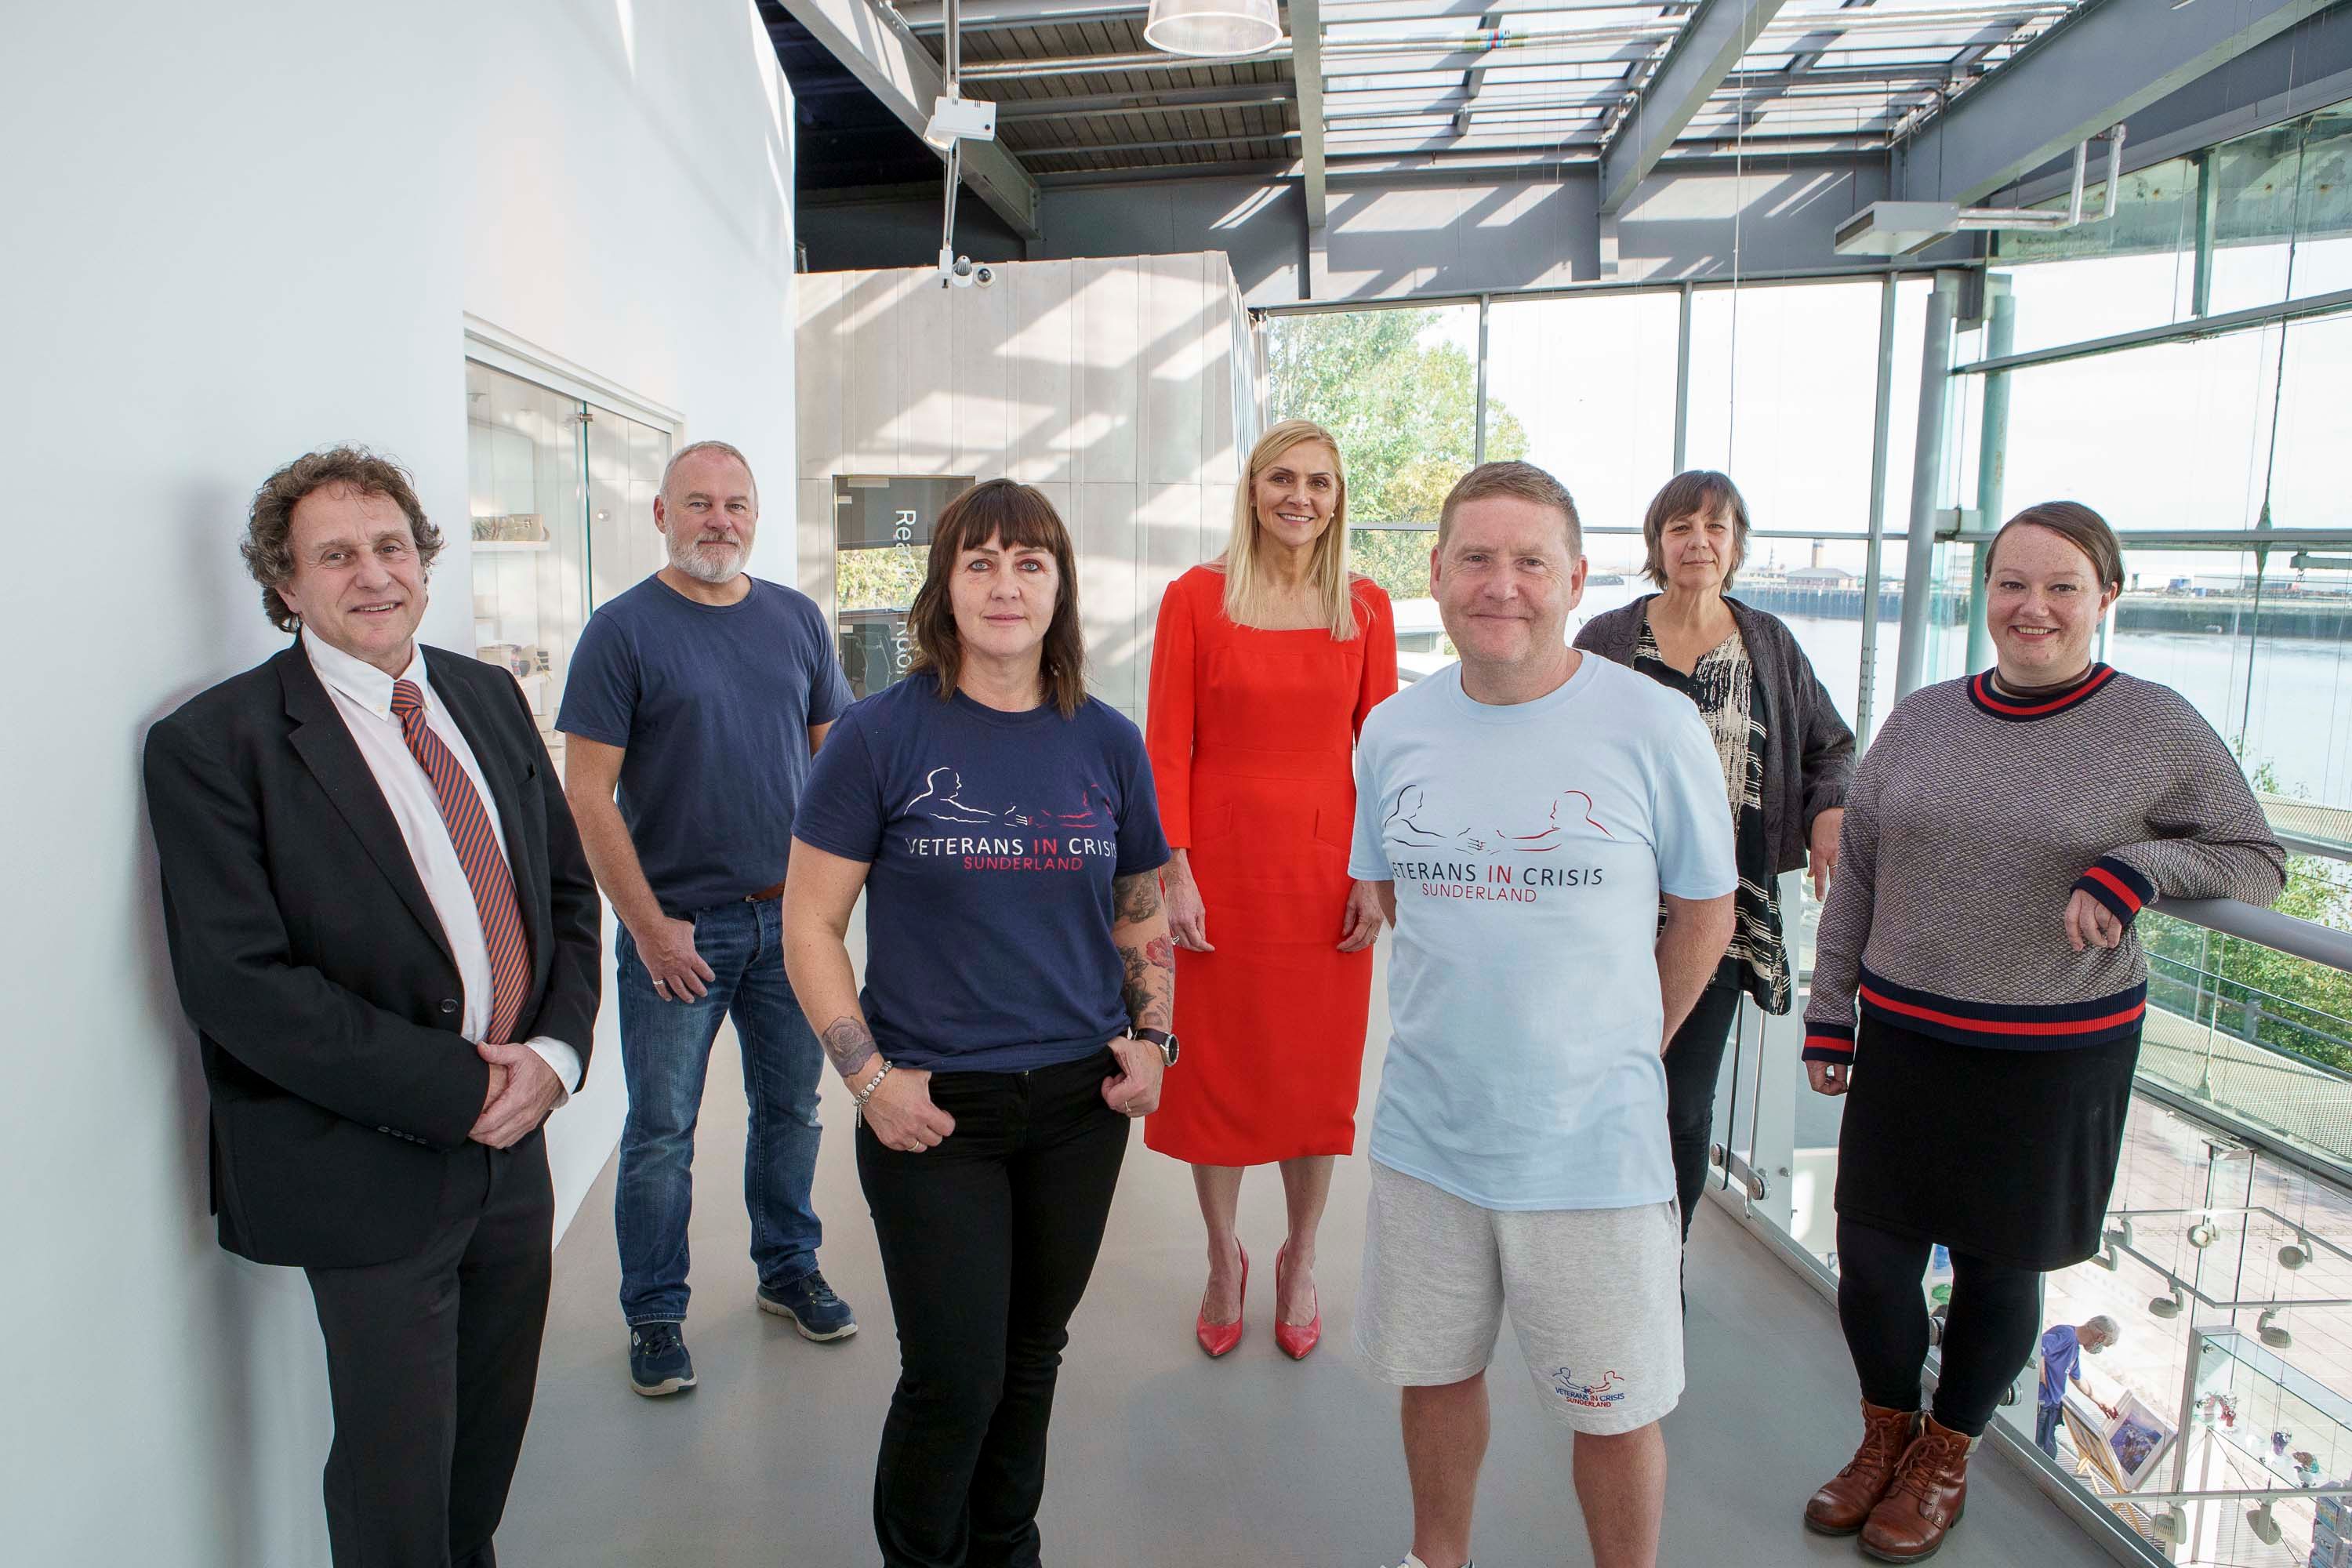 Staff from the University of Sunderland joined by members of Veterans in Crisis